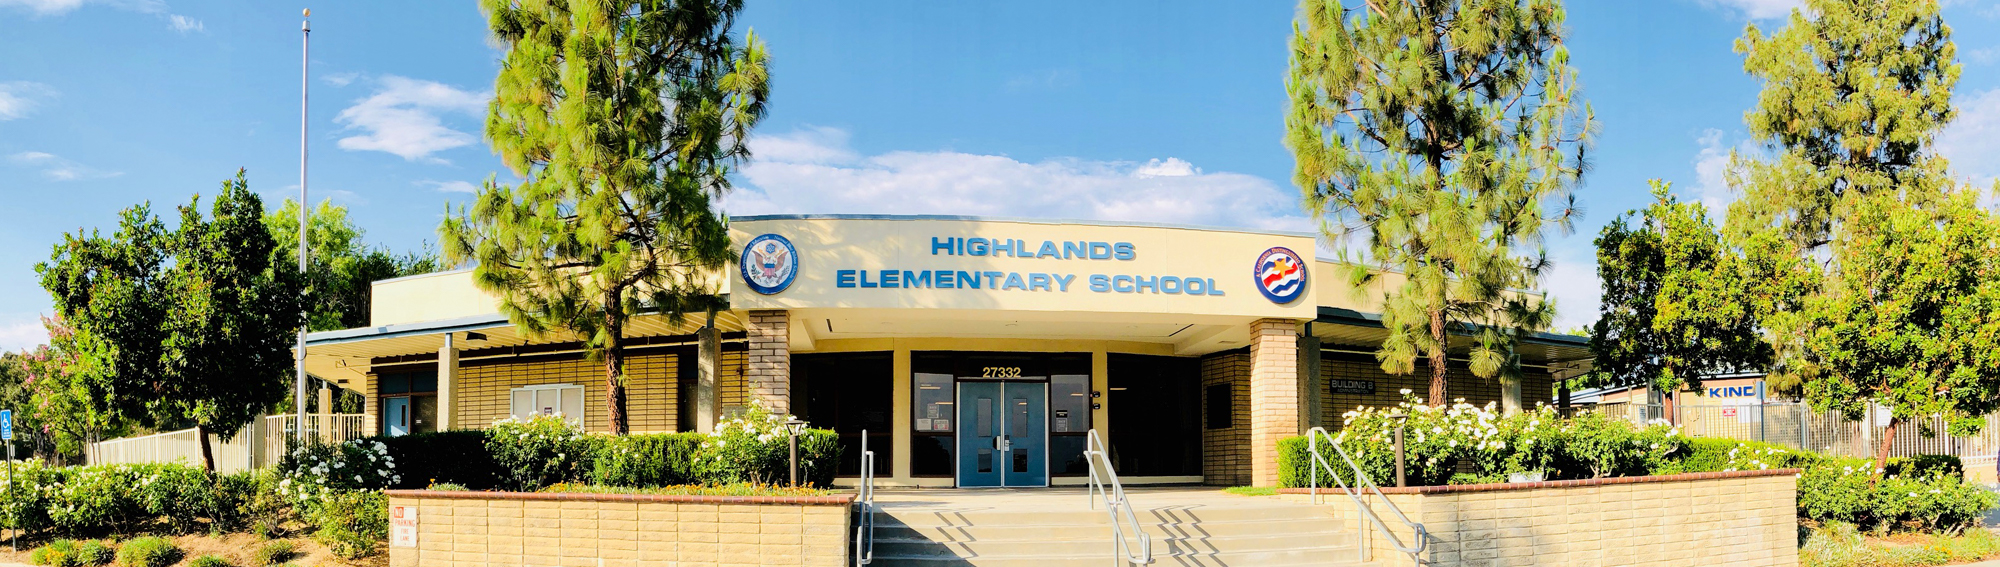 front view of Highlands Elementary School